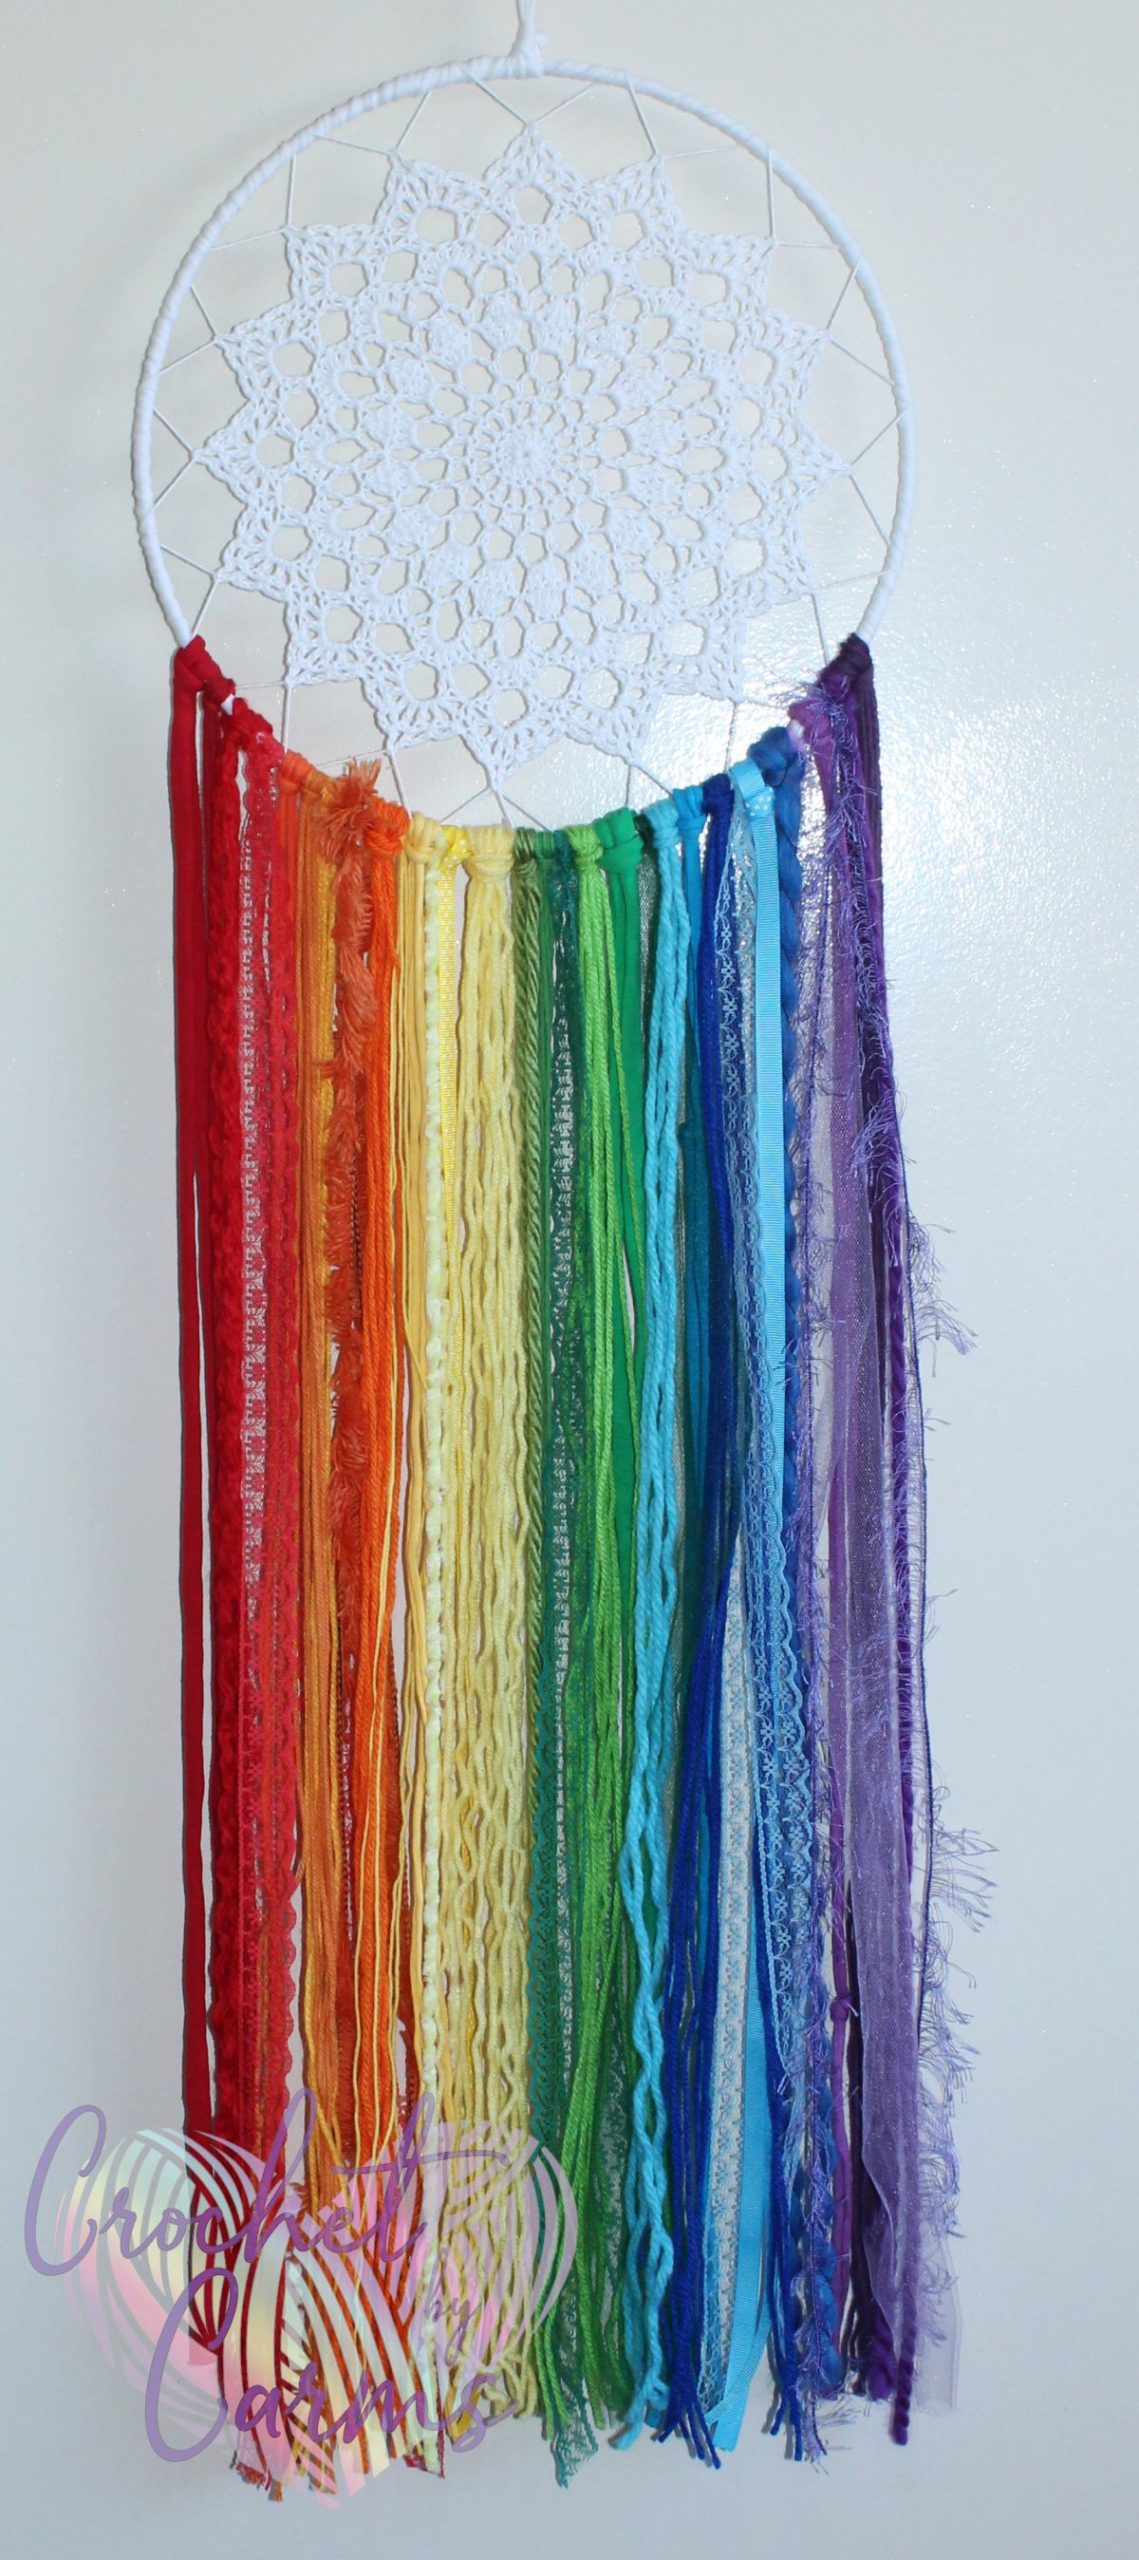 Rainbow Wall Hanging / Dreamcatcher | Crochet by Carms